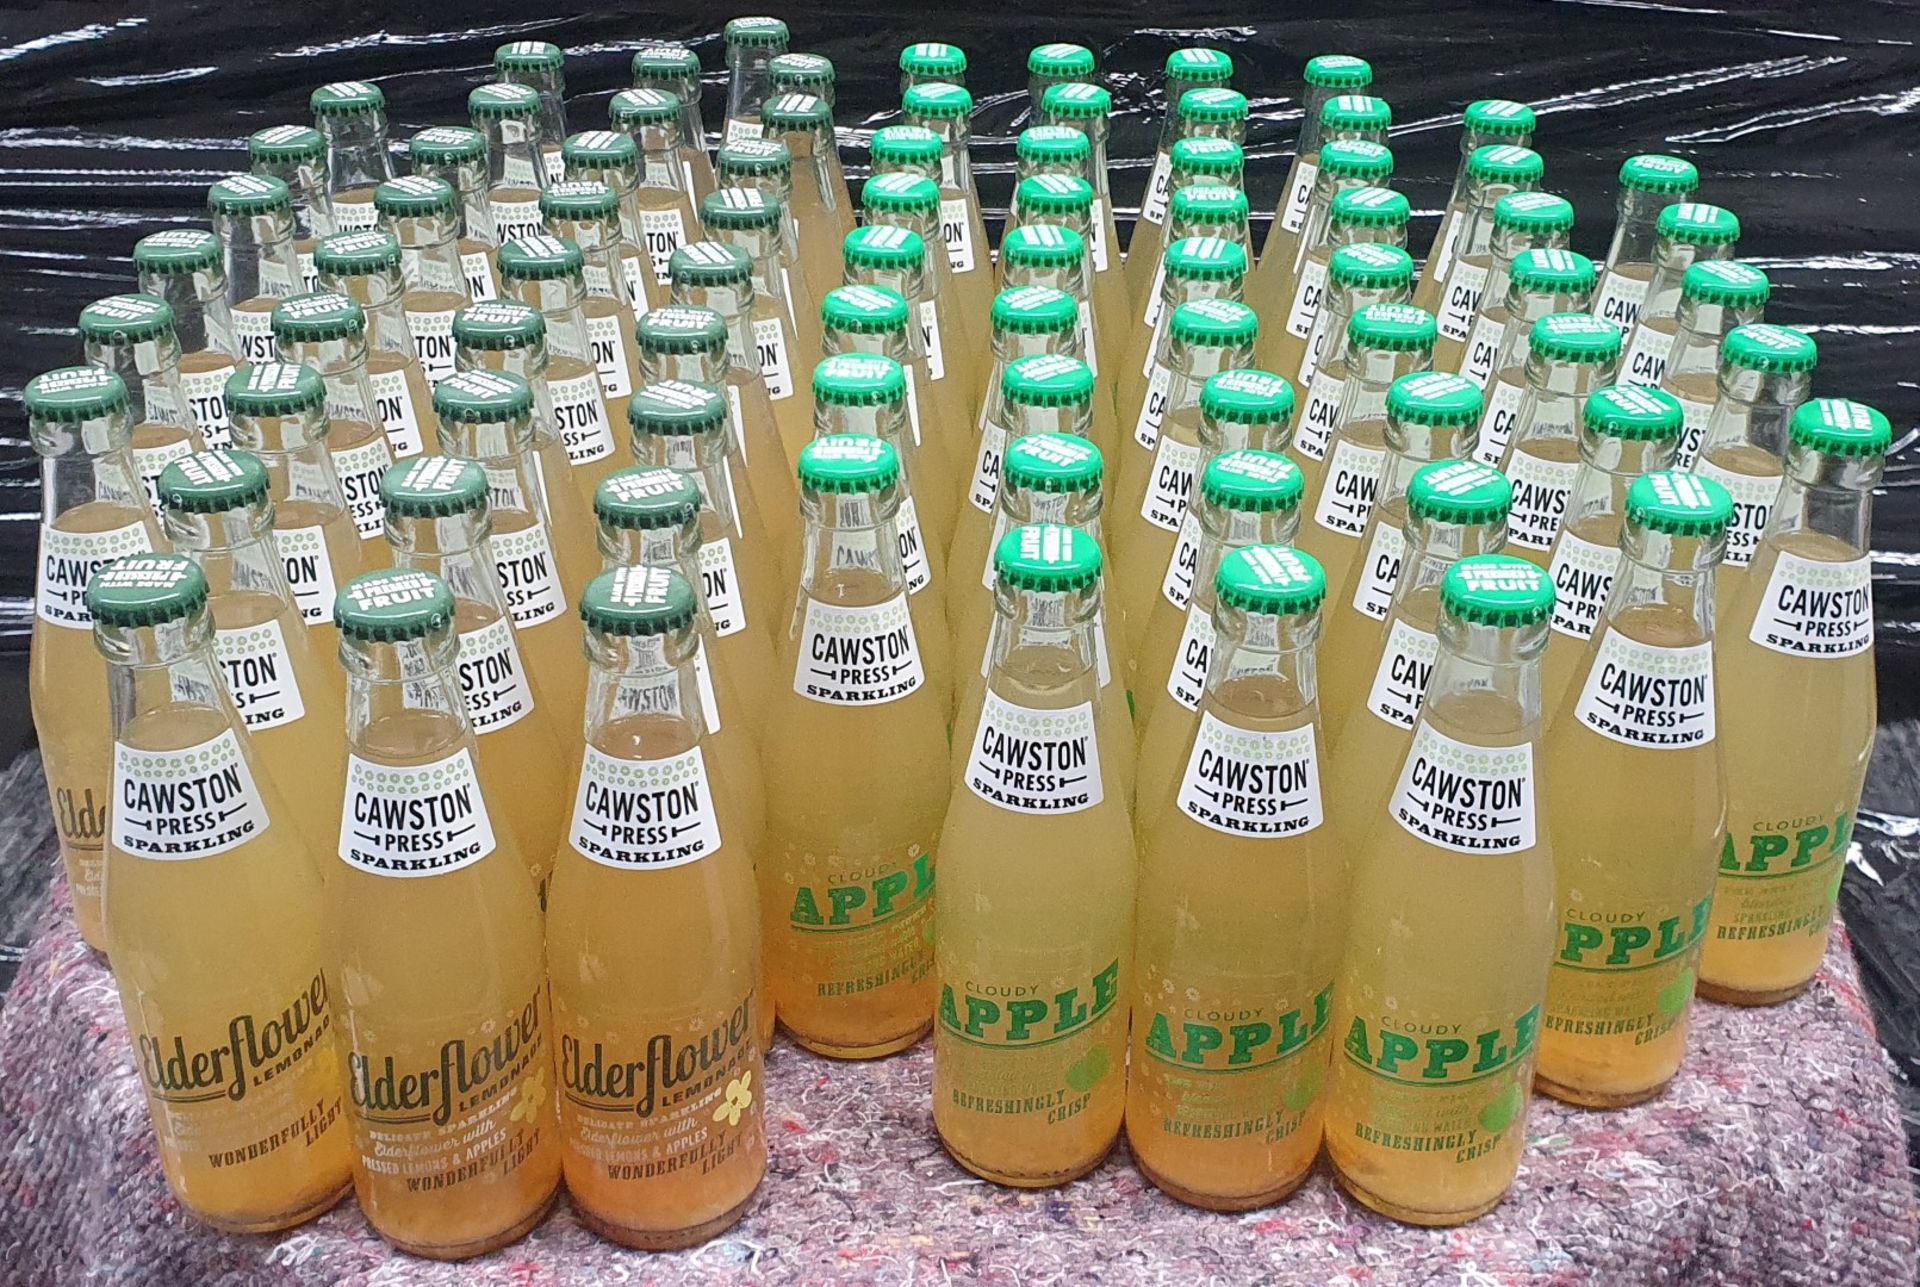 80 x Bottles of Cawston Press 250ml Sparkling Apple and Lemonade Drinks - Ref: TCH218 - CL840 -